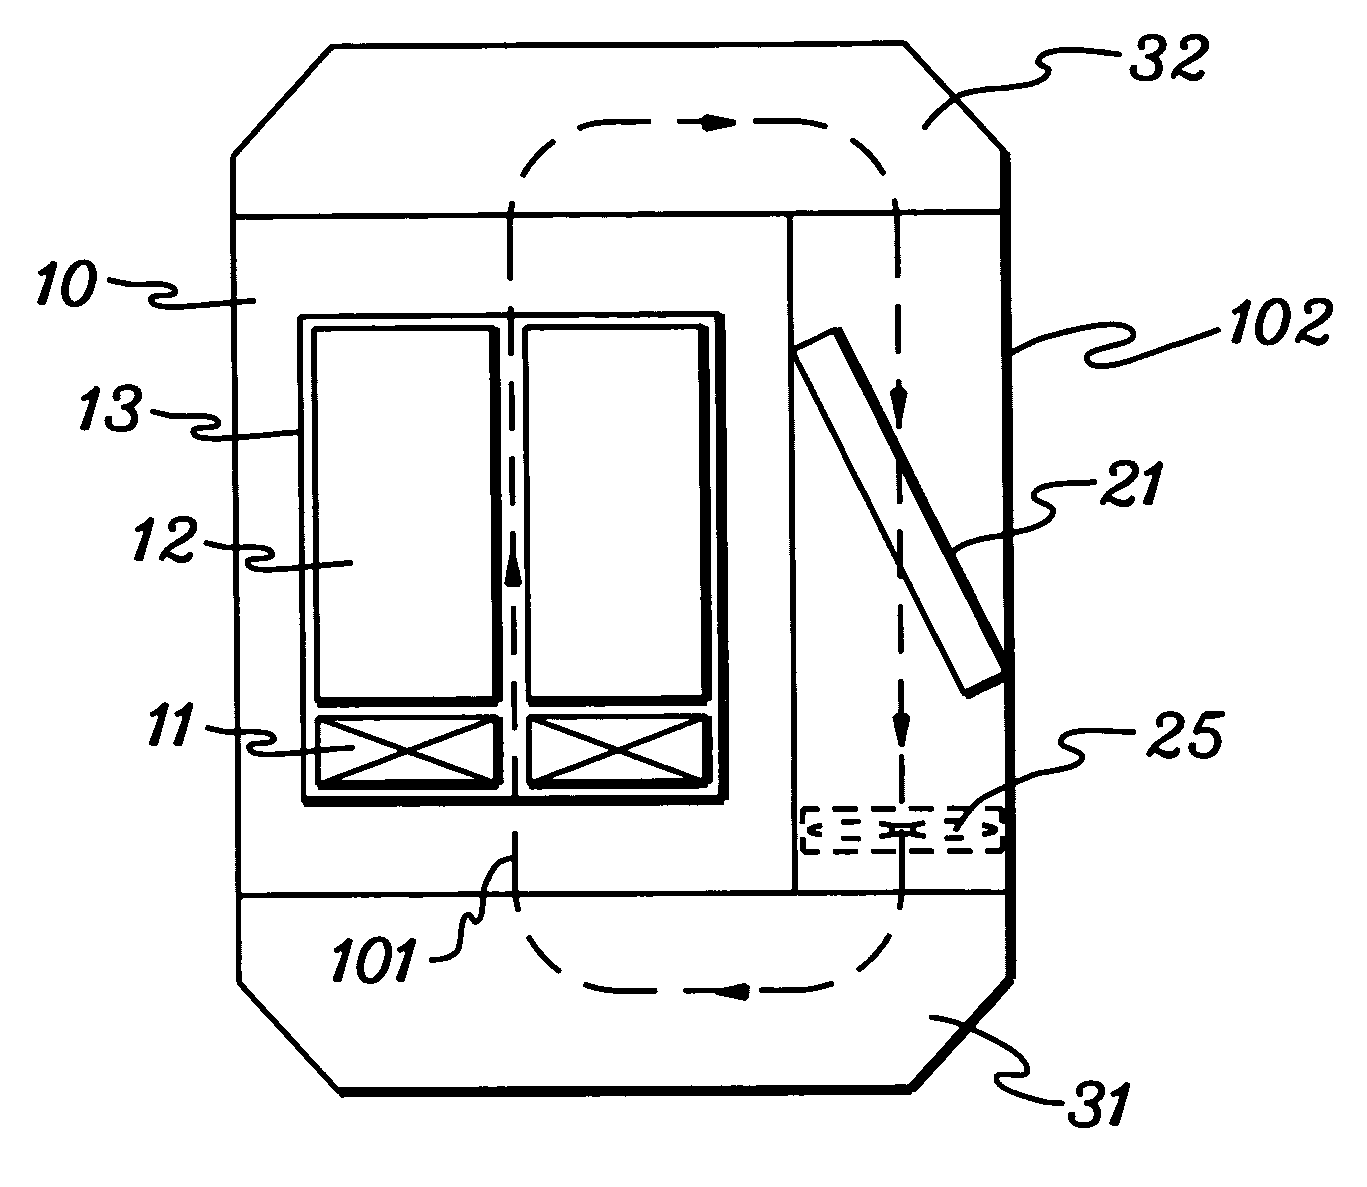 Condensate removal system and method for facilitating cooling of an electronics system